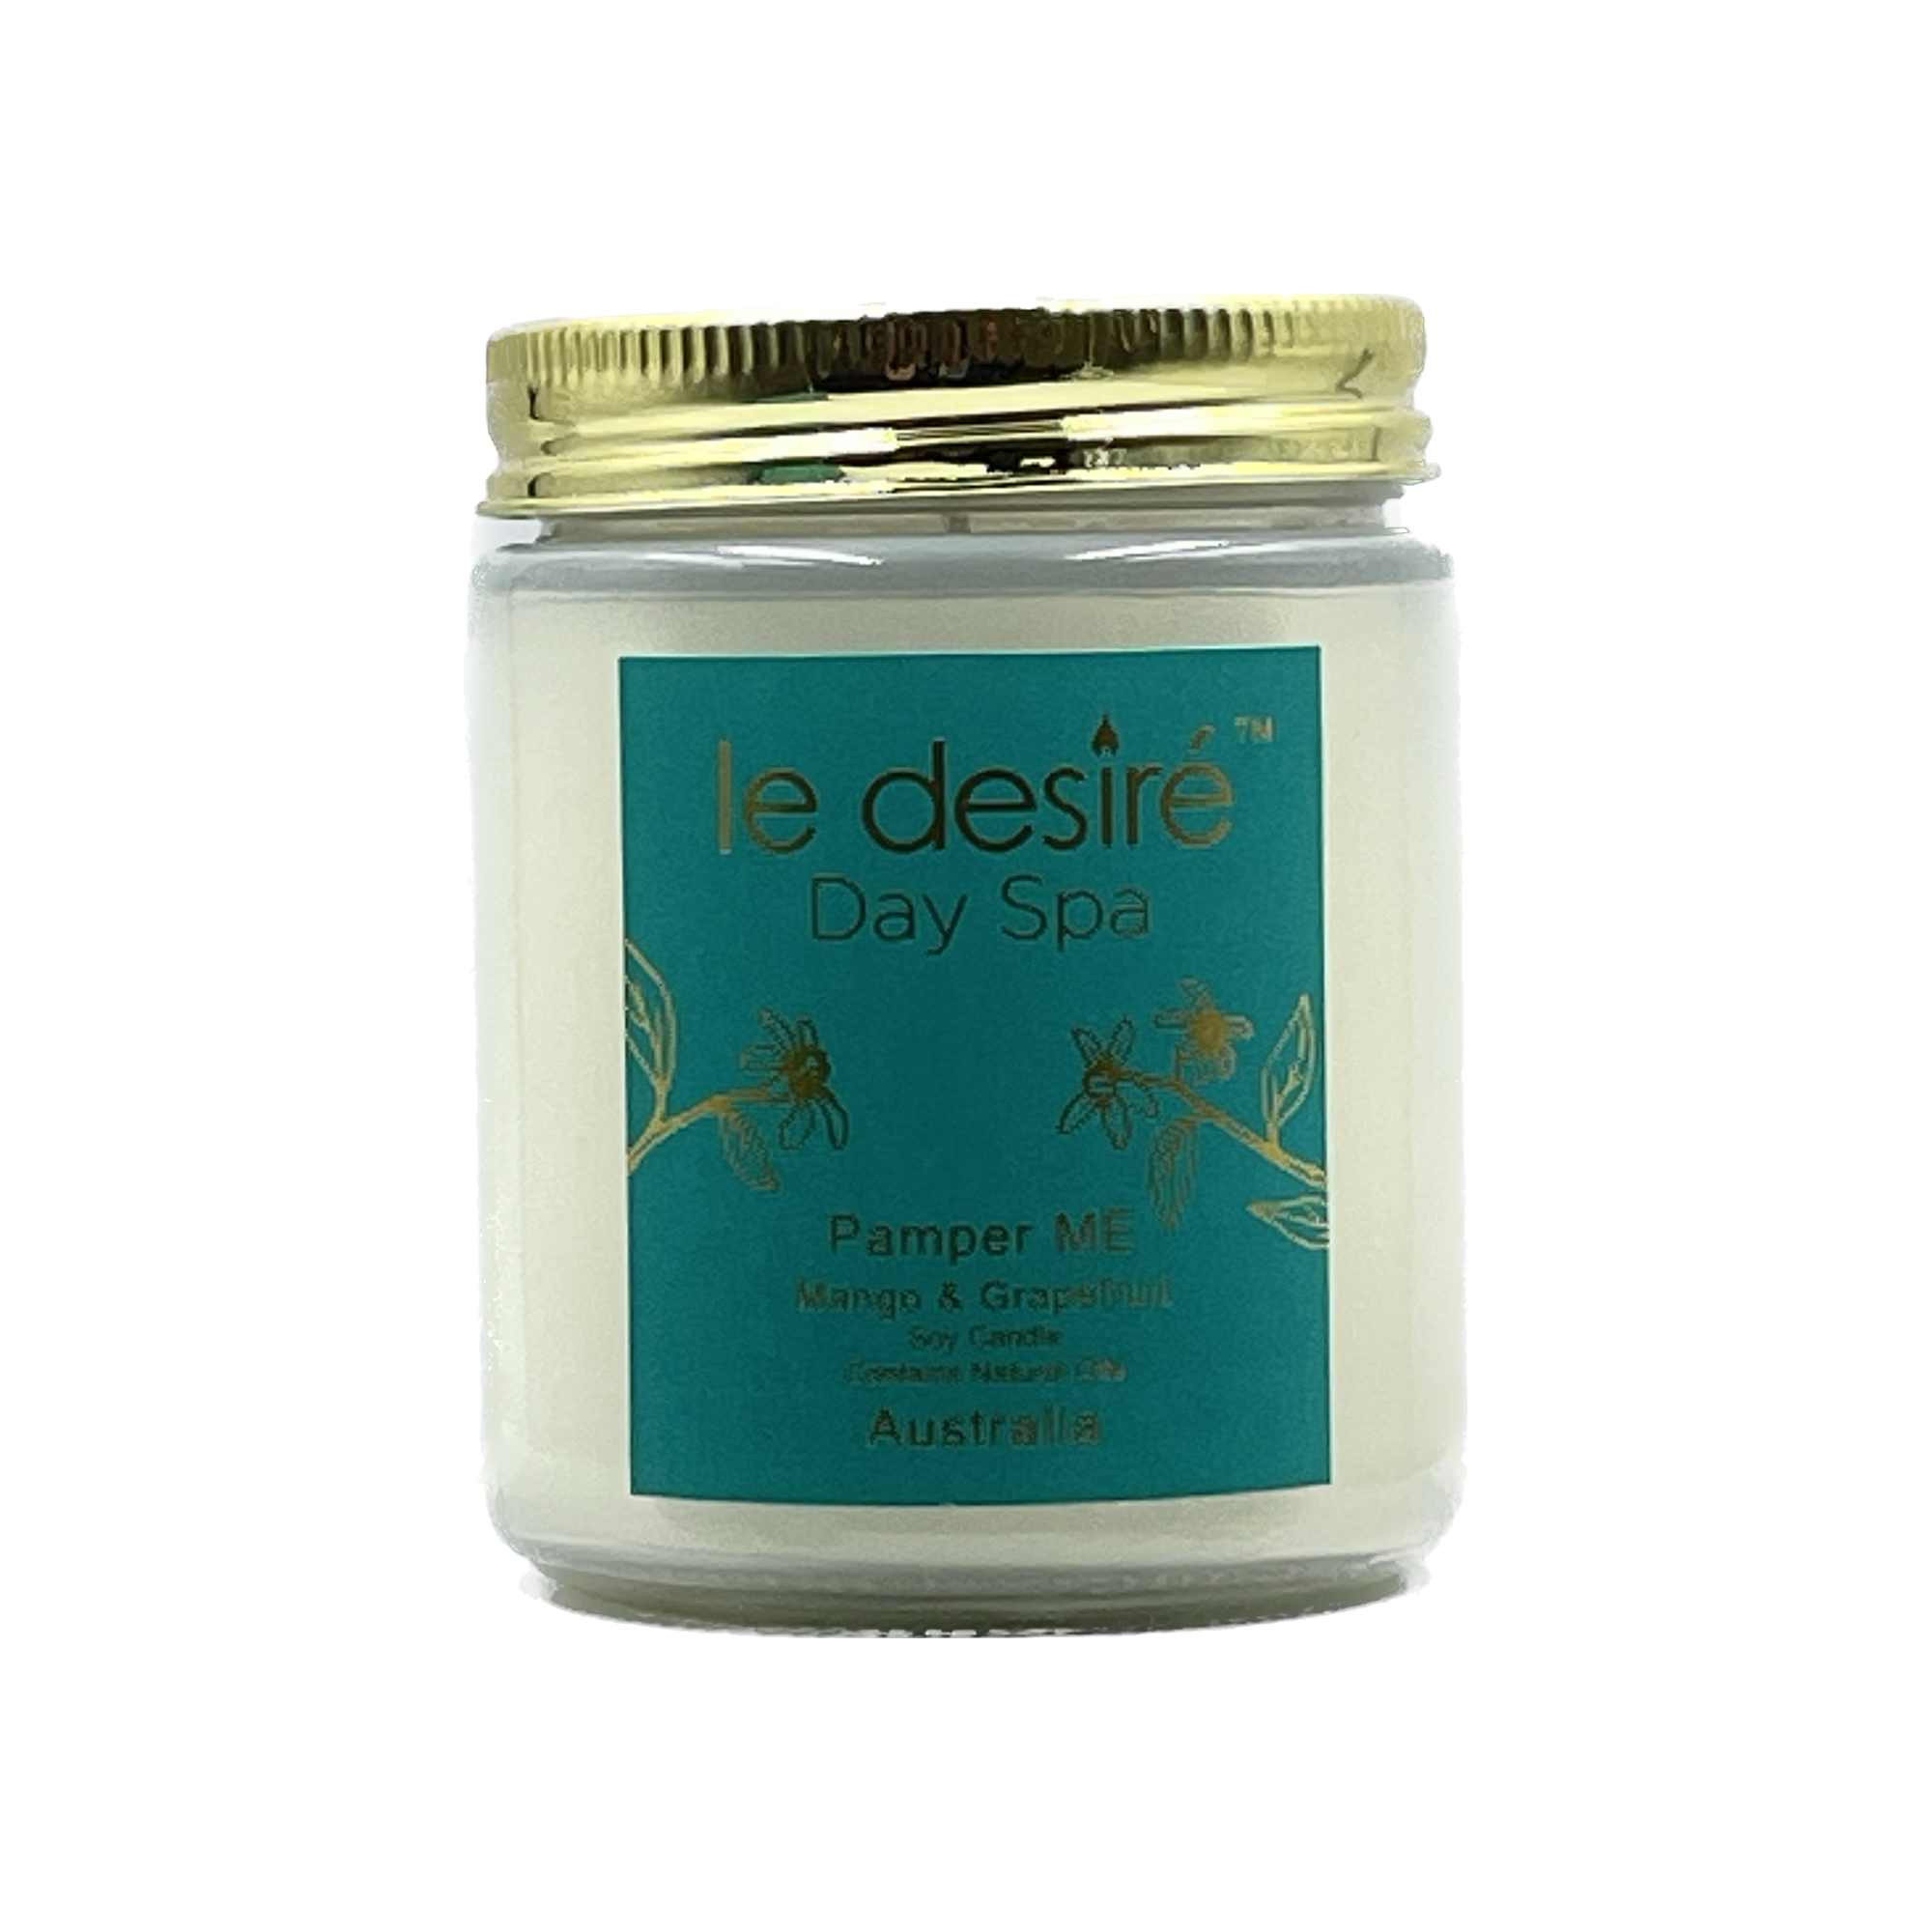 Pamper ME (Mango & Grapefruit) - Day Spa Soy Candle